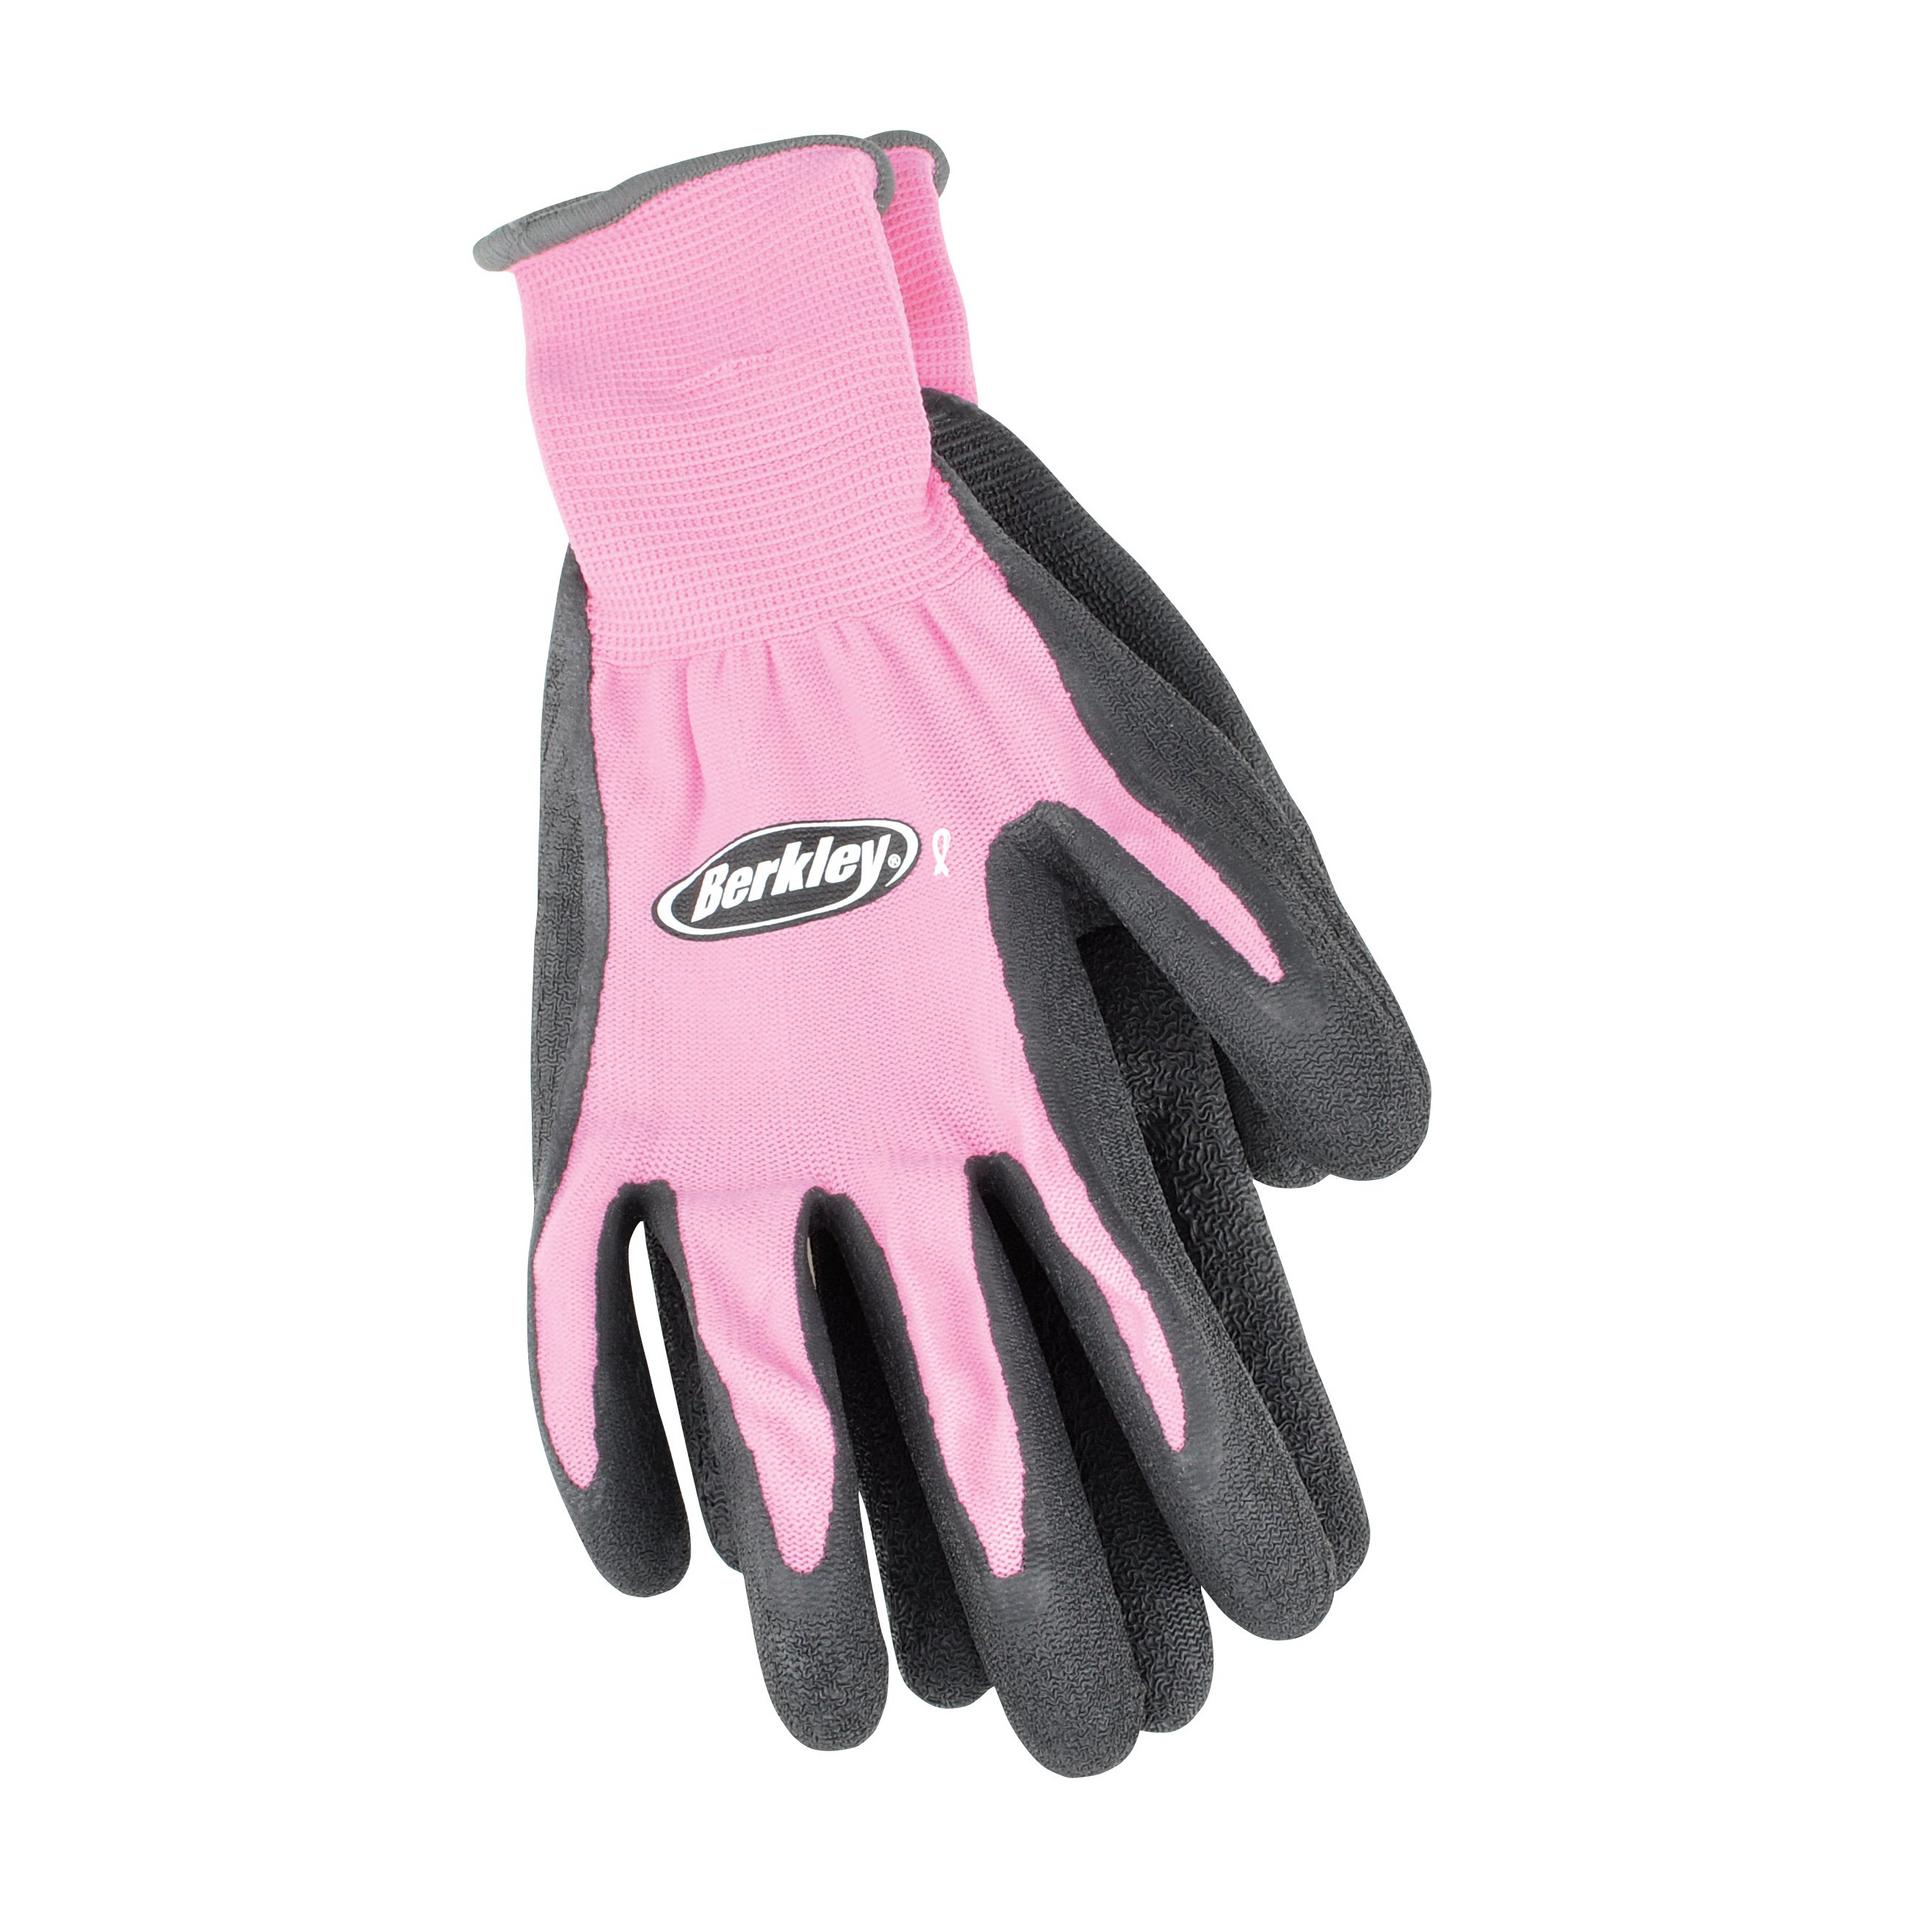 Coated Grip Gloves